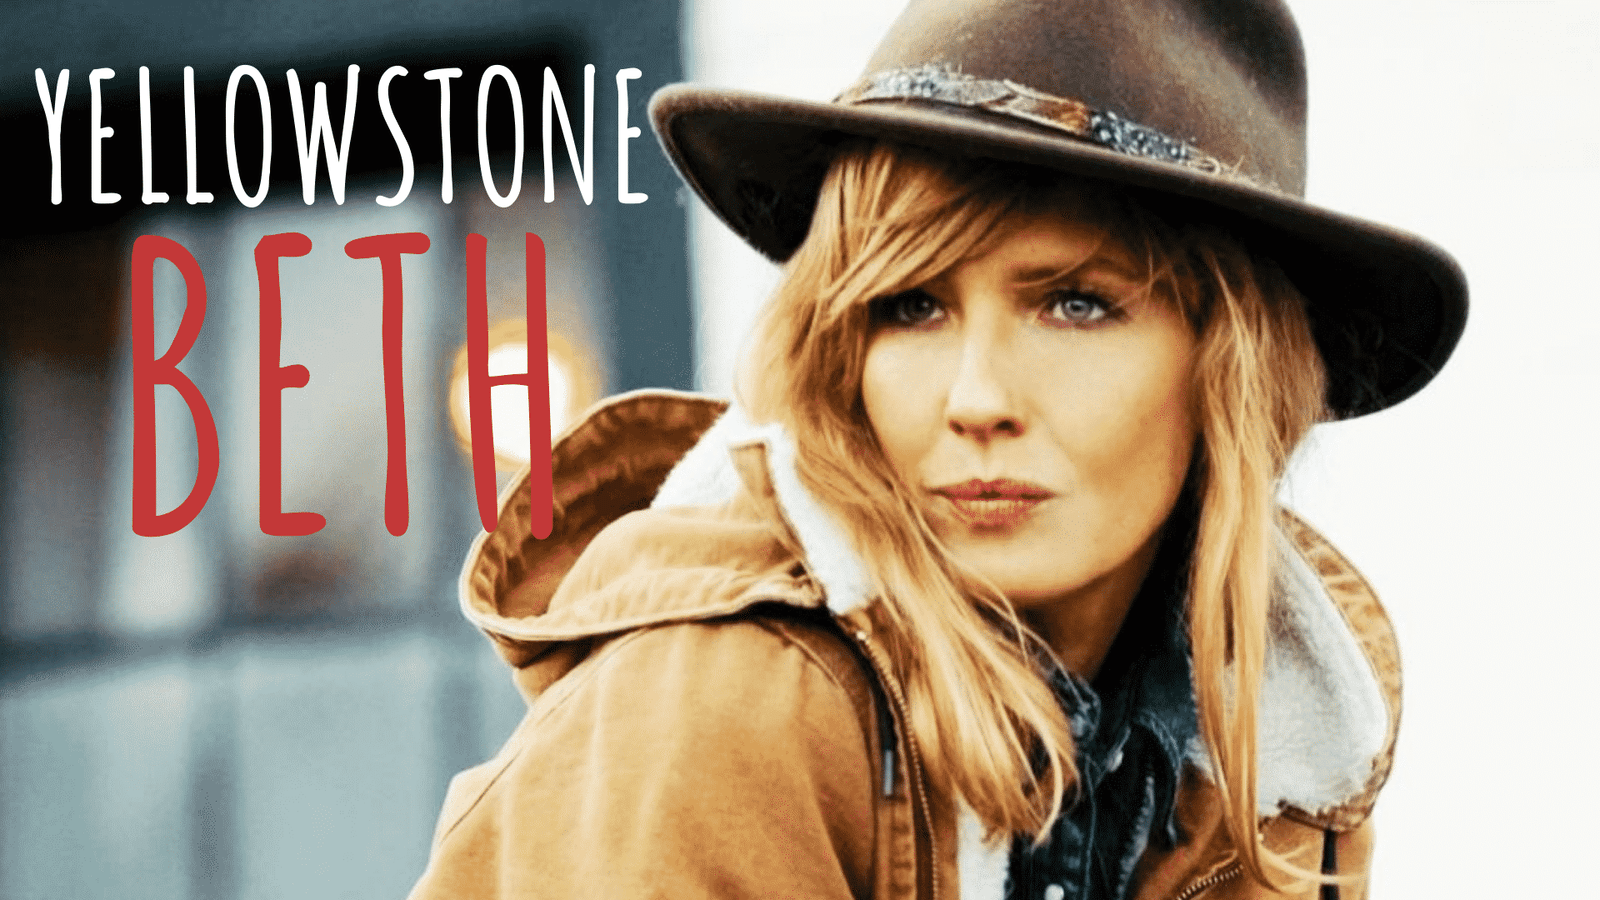 One of the most loved characters of Yellowstone: Beth Dutton. 